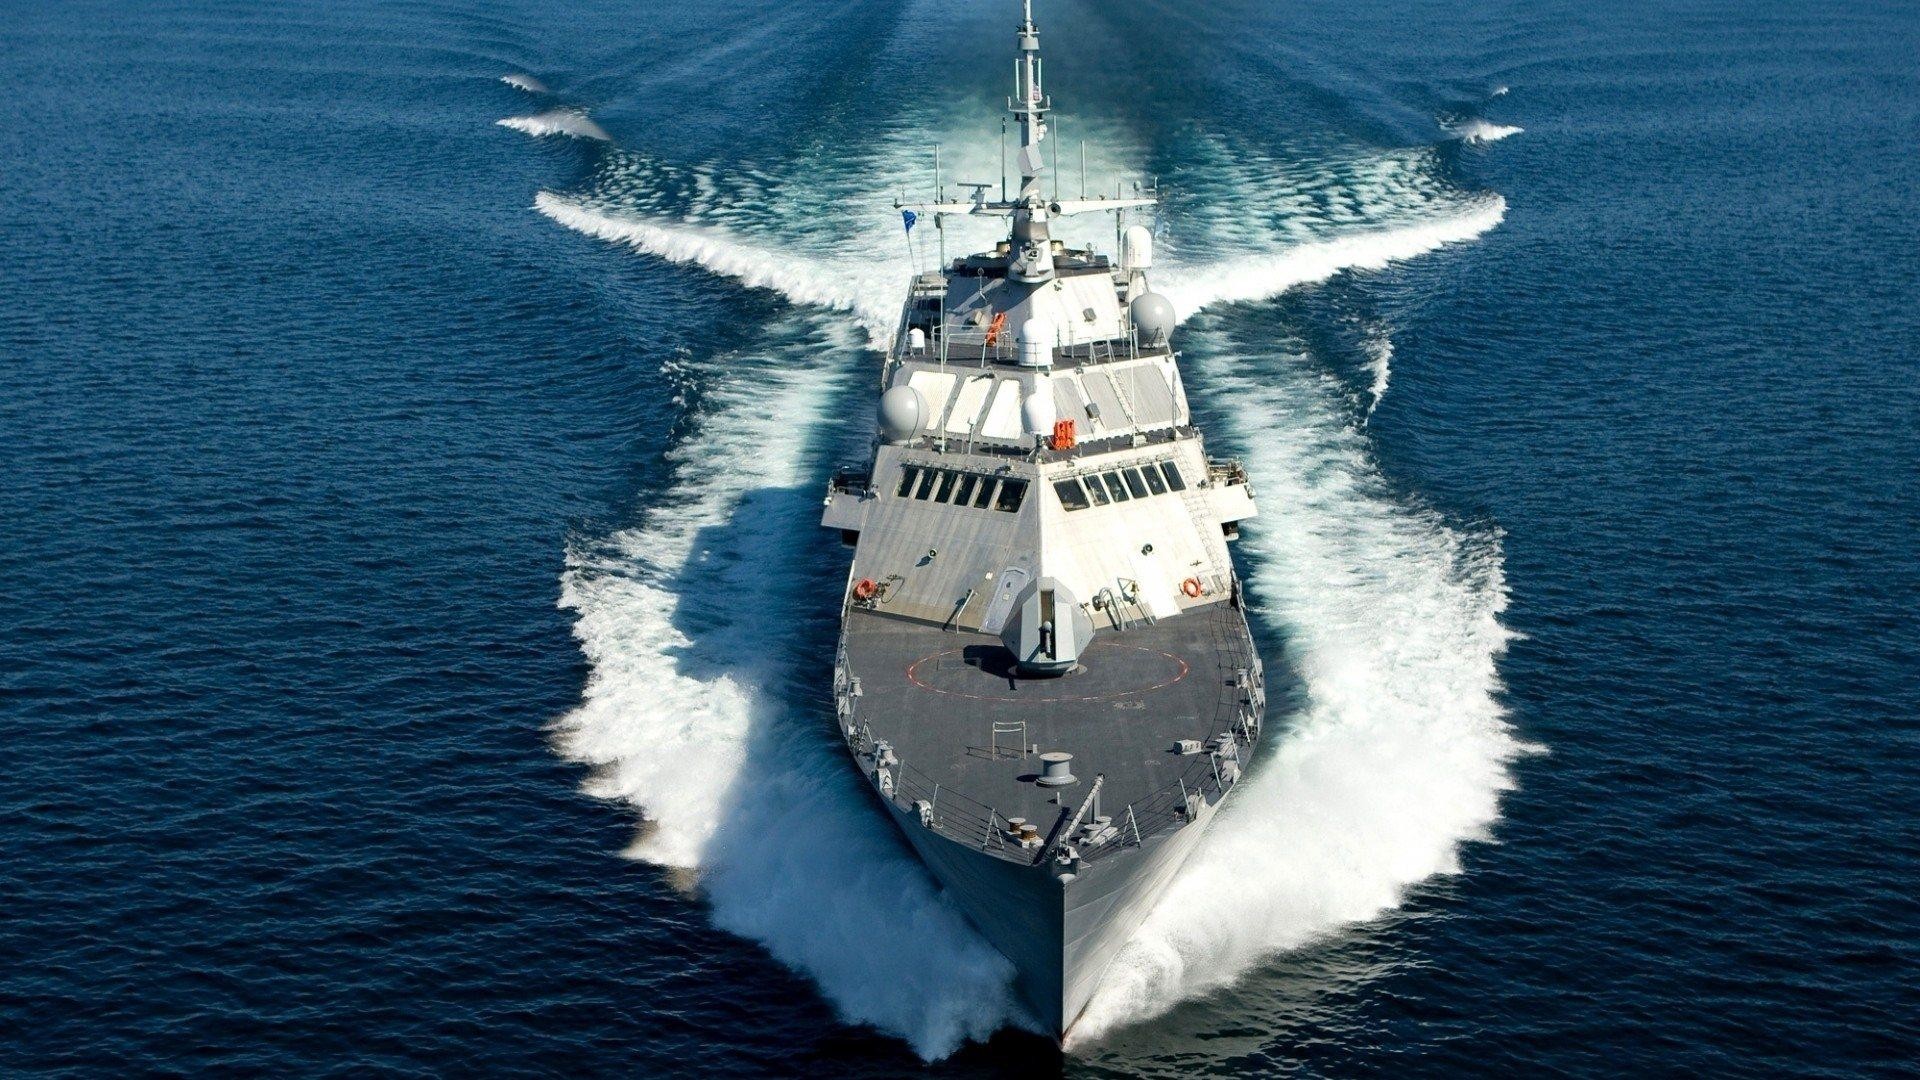 HD Wallpapers Of Indian Navy